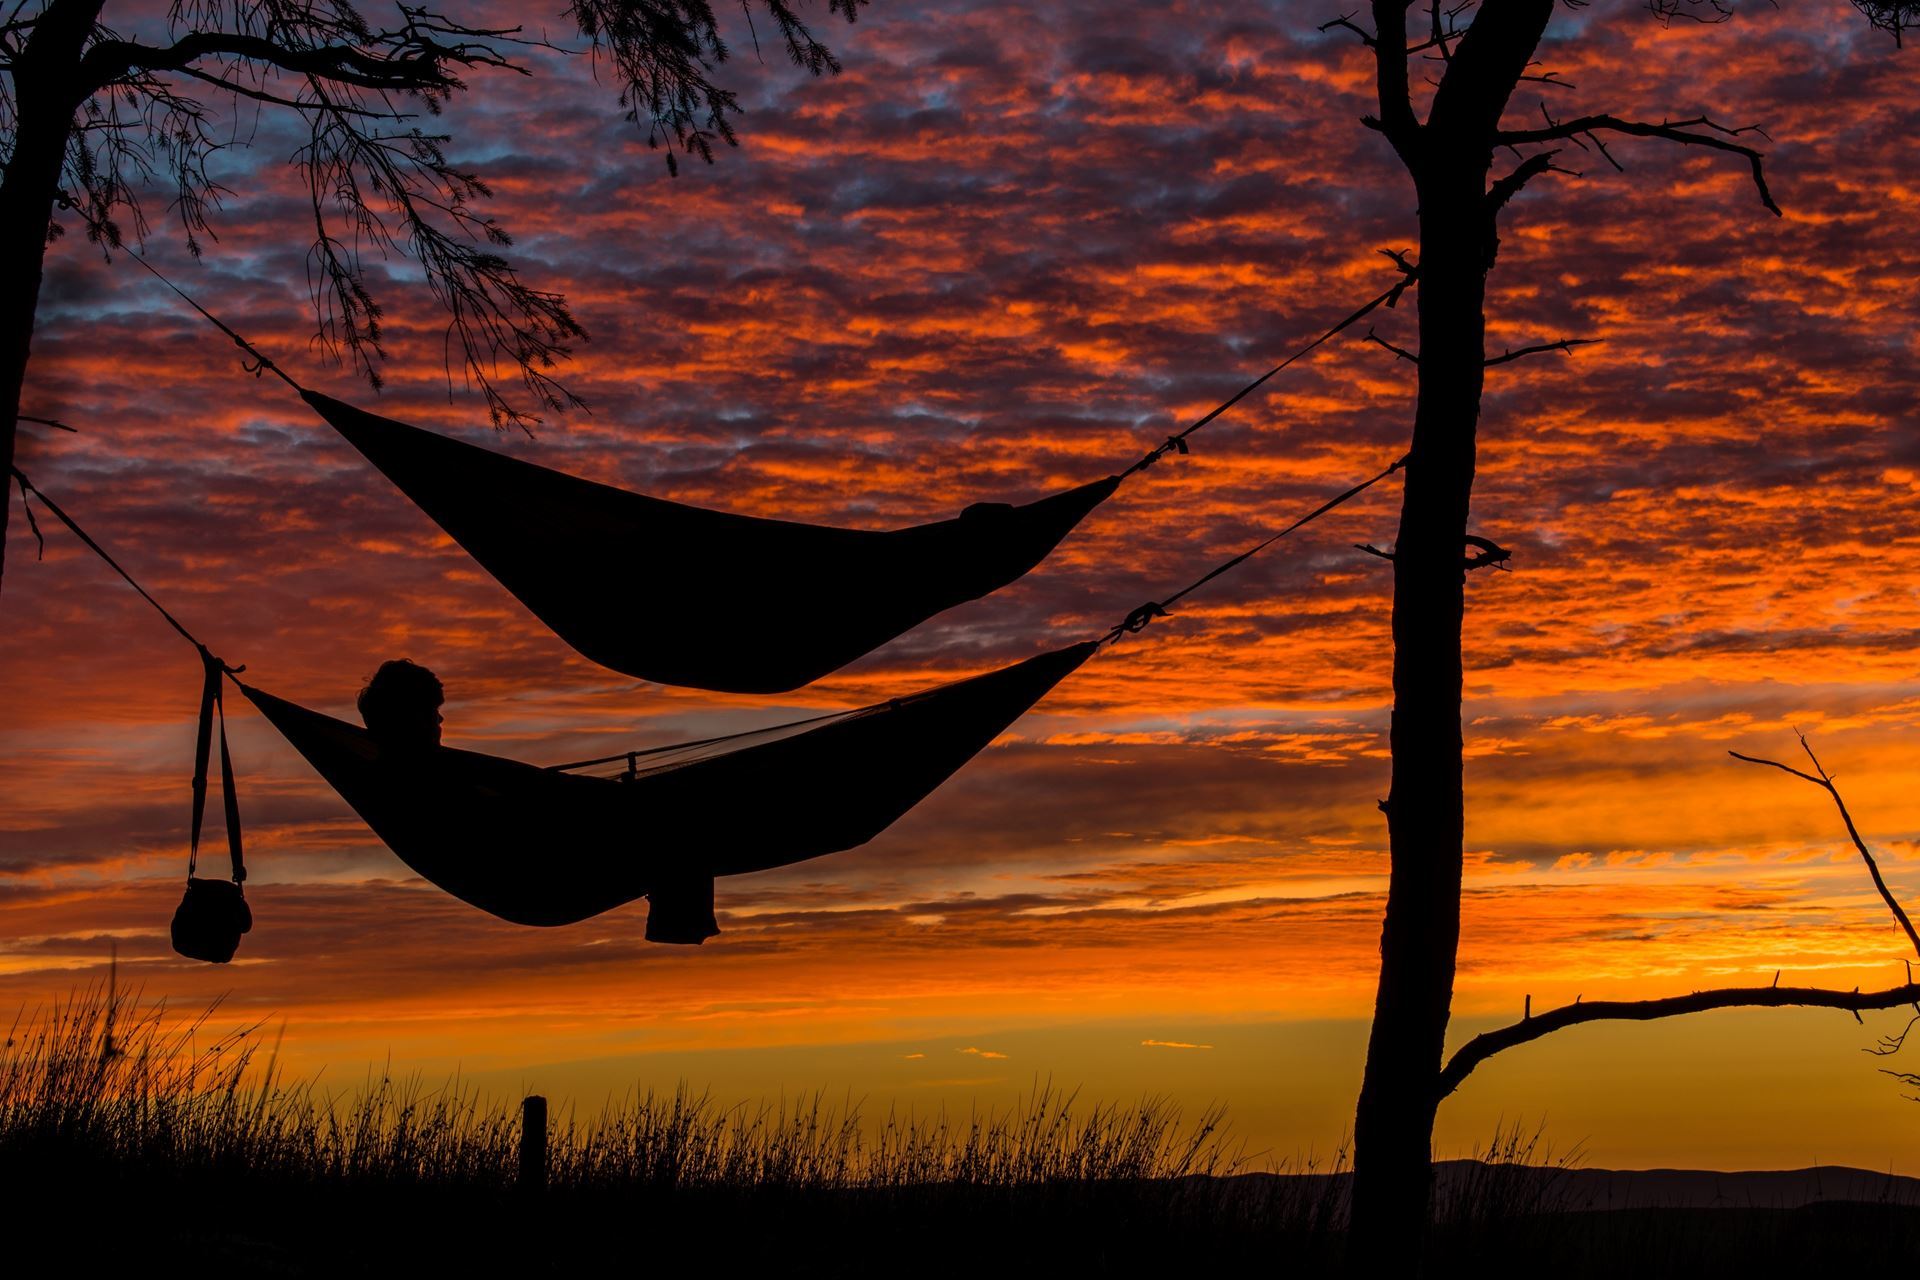 Two hammocks in profile against a colorful sunset